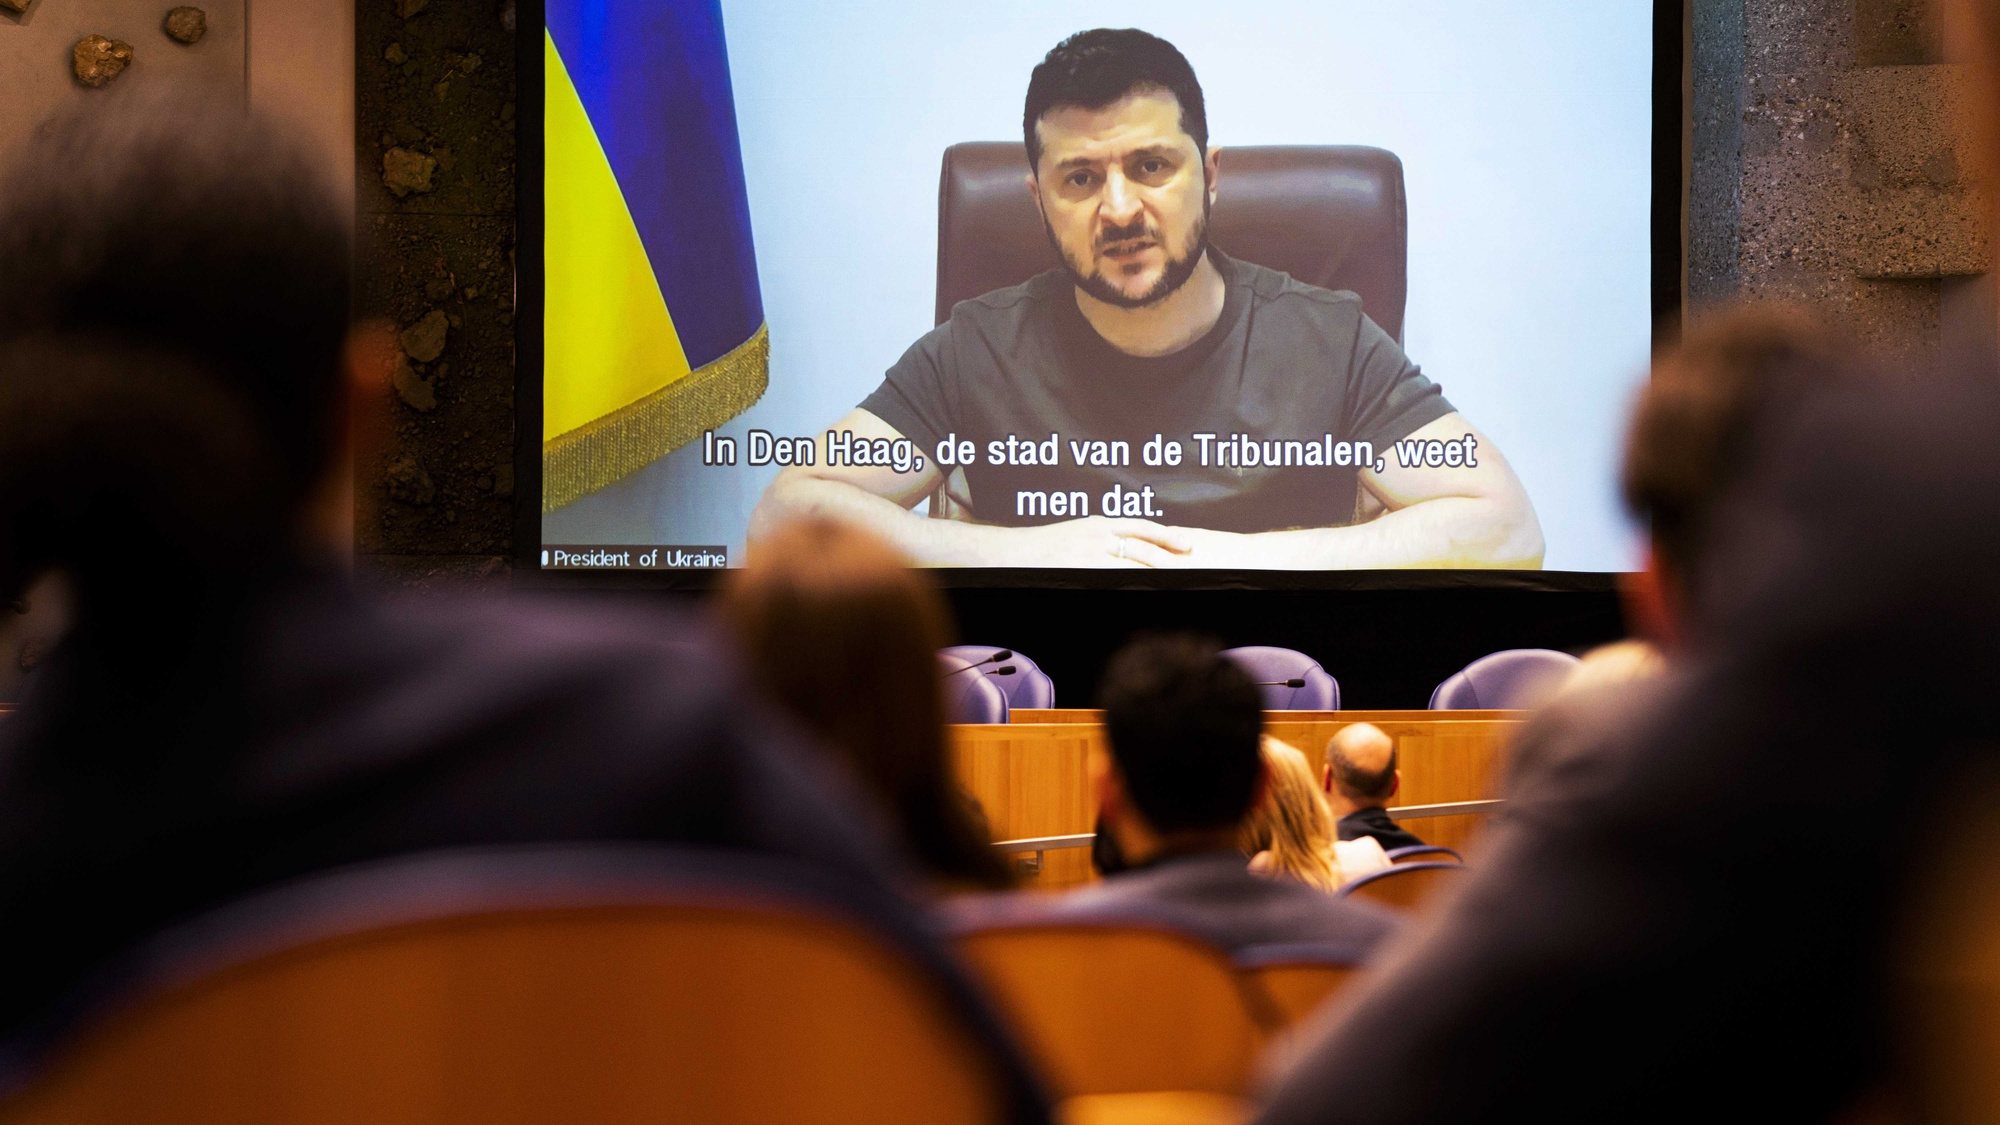 epa09861551 Ukrainian President Volodymyr Zelensky gives a speech in the House of Representatives via a video link in The Hague, The Netherlands, 31 March 2022. The Ukrainian President Zelensky has addressed the parliaments of more countries in hopes of rallying support for his government in response to Russia&#039;s invasion of his country.  EPA/BART MAAT